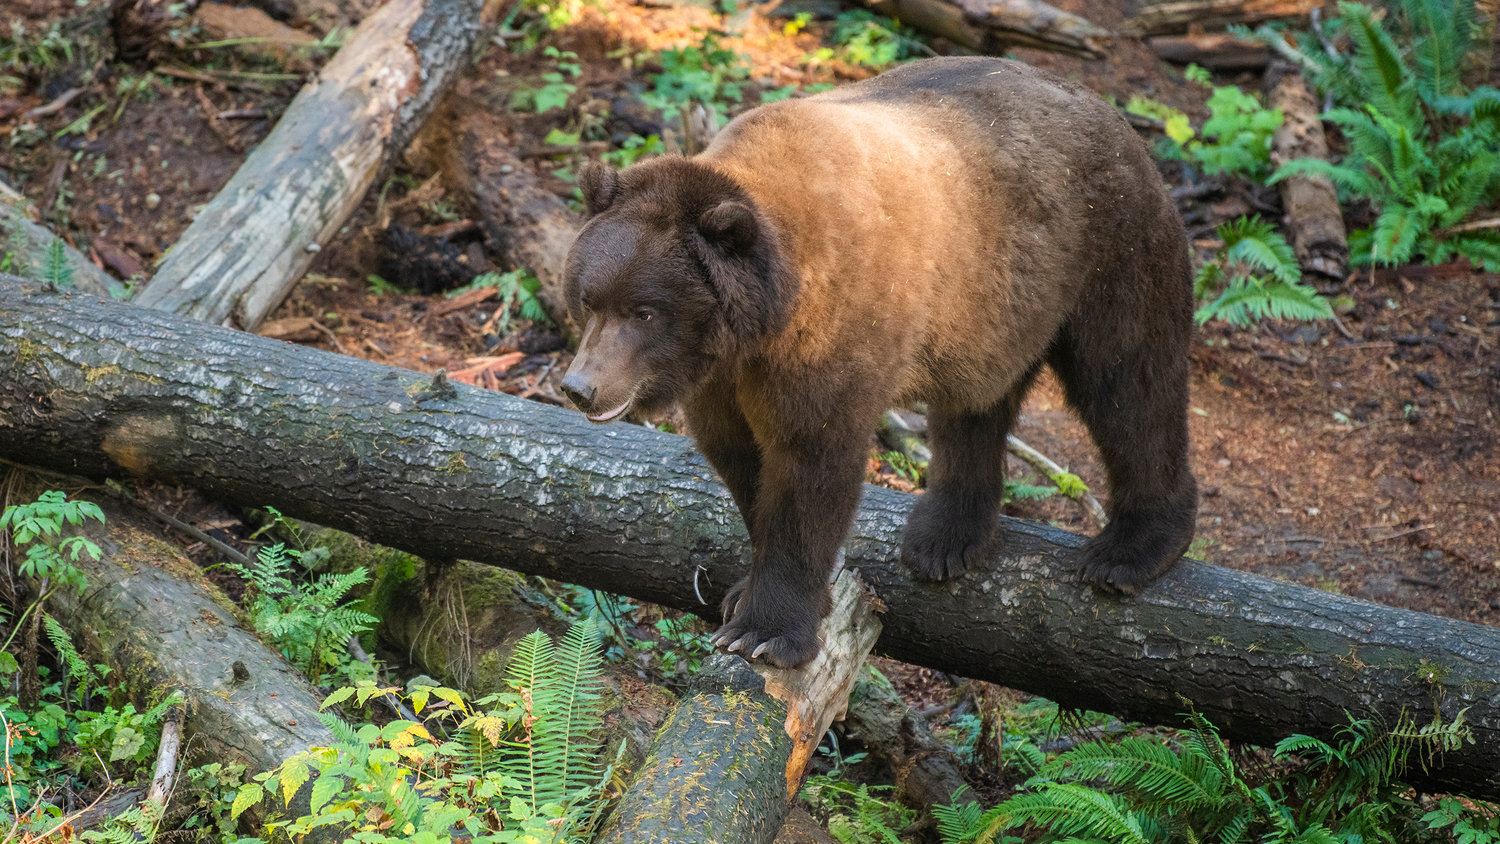 A Grizzly bear walks on downed trees at NW Trek in October 2022.